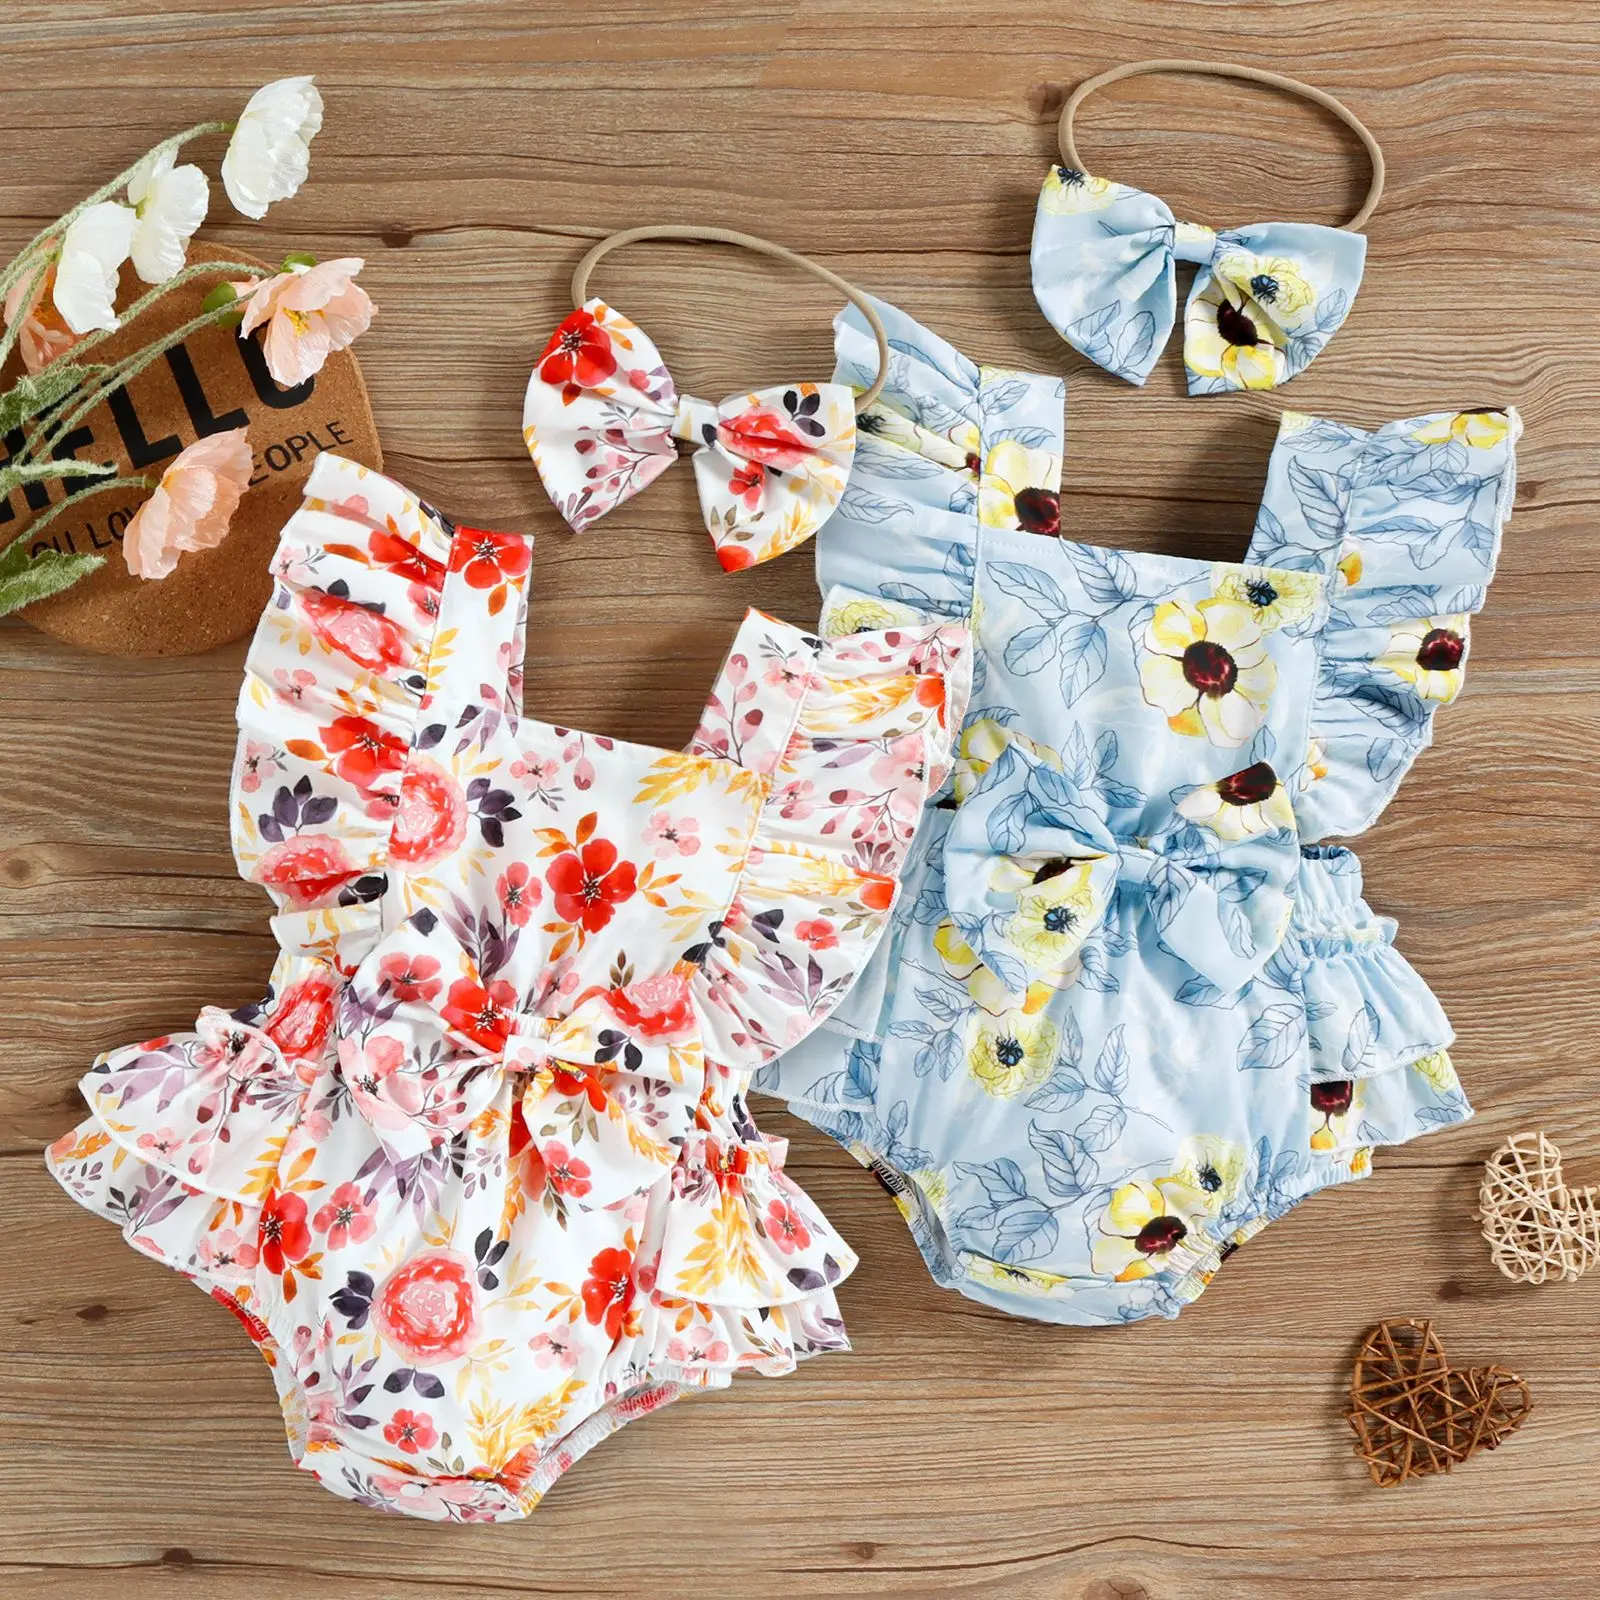 New Cute Baby Short Sleeve Floral Print Ruffle Skirt Romper Bow-Knot Headband Toddler Infant Baby Girls CLothing 2Pcs Set 0-18M